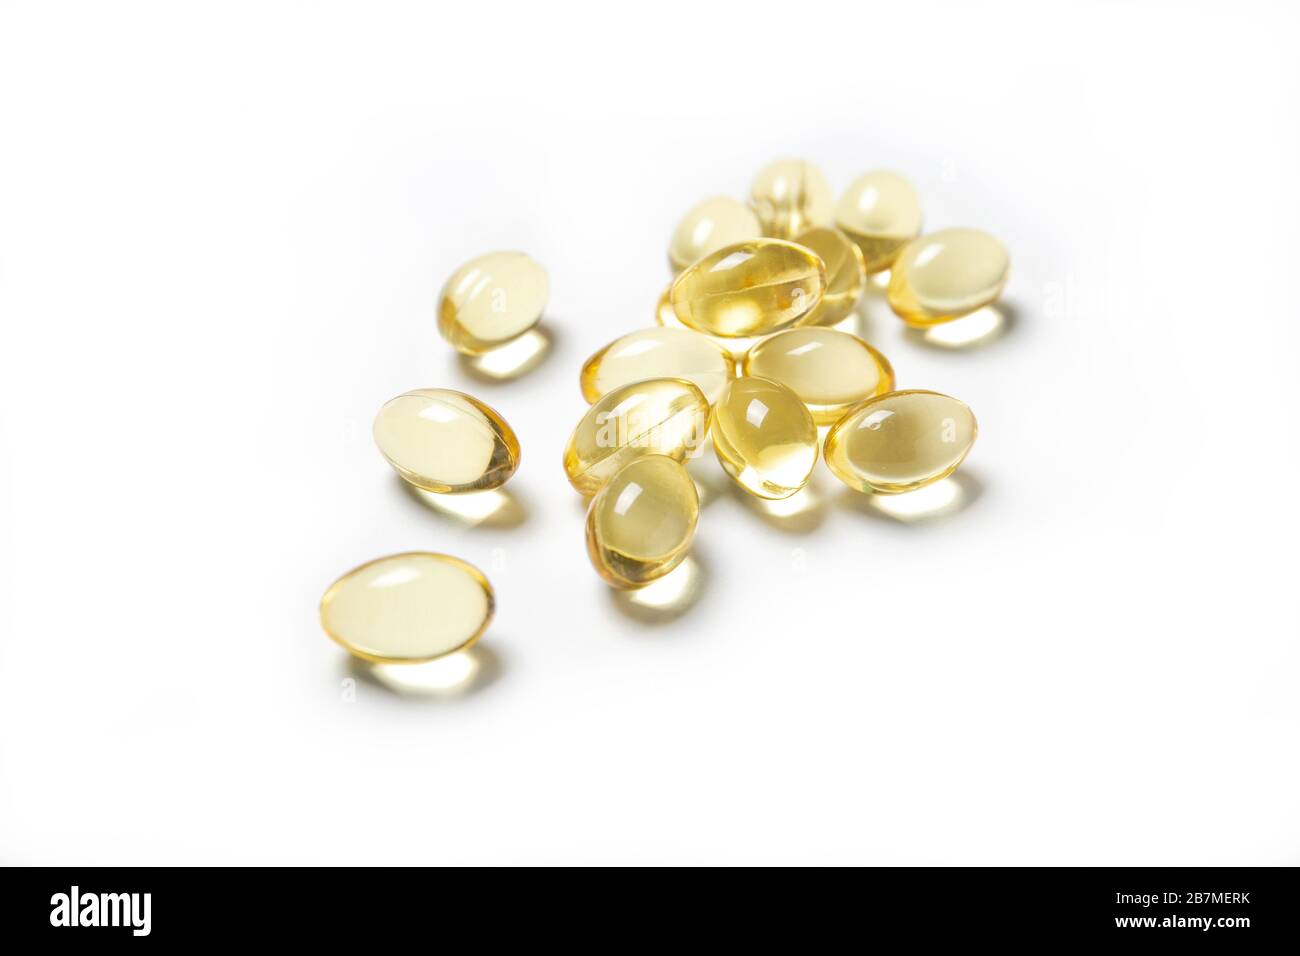 Fish oil capsules on a white background. Nutritional supplements Stock Photo